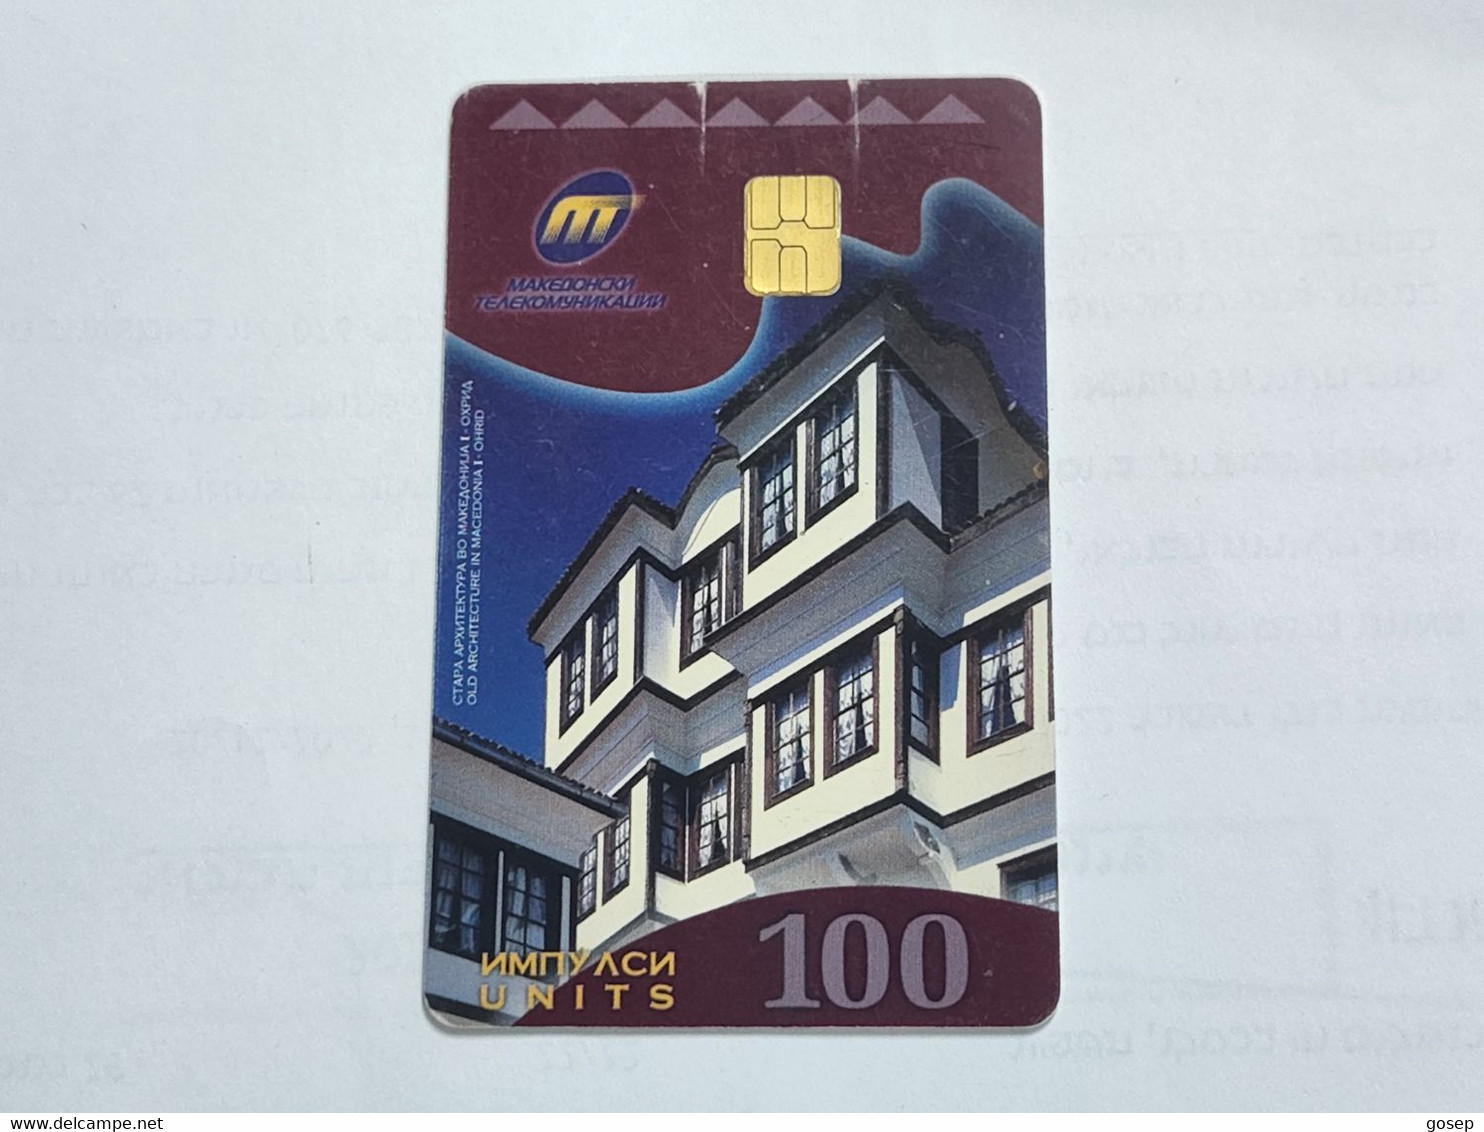 Macedonia-(MK-MAT-0007)-Old House In Ohrid-(5)-(9/98)-(100units)-(000470879)-tirage-?-used Card+1card Prepiad Free - Nordmazedonien